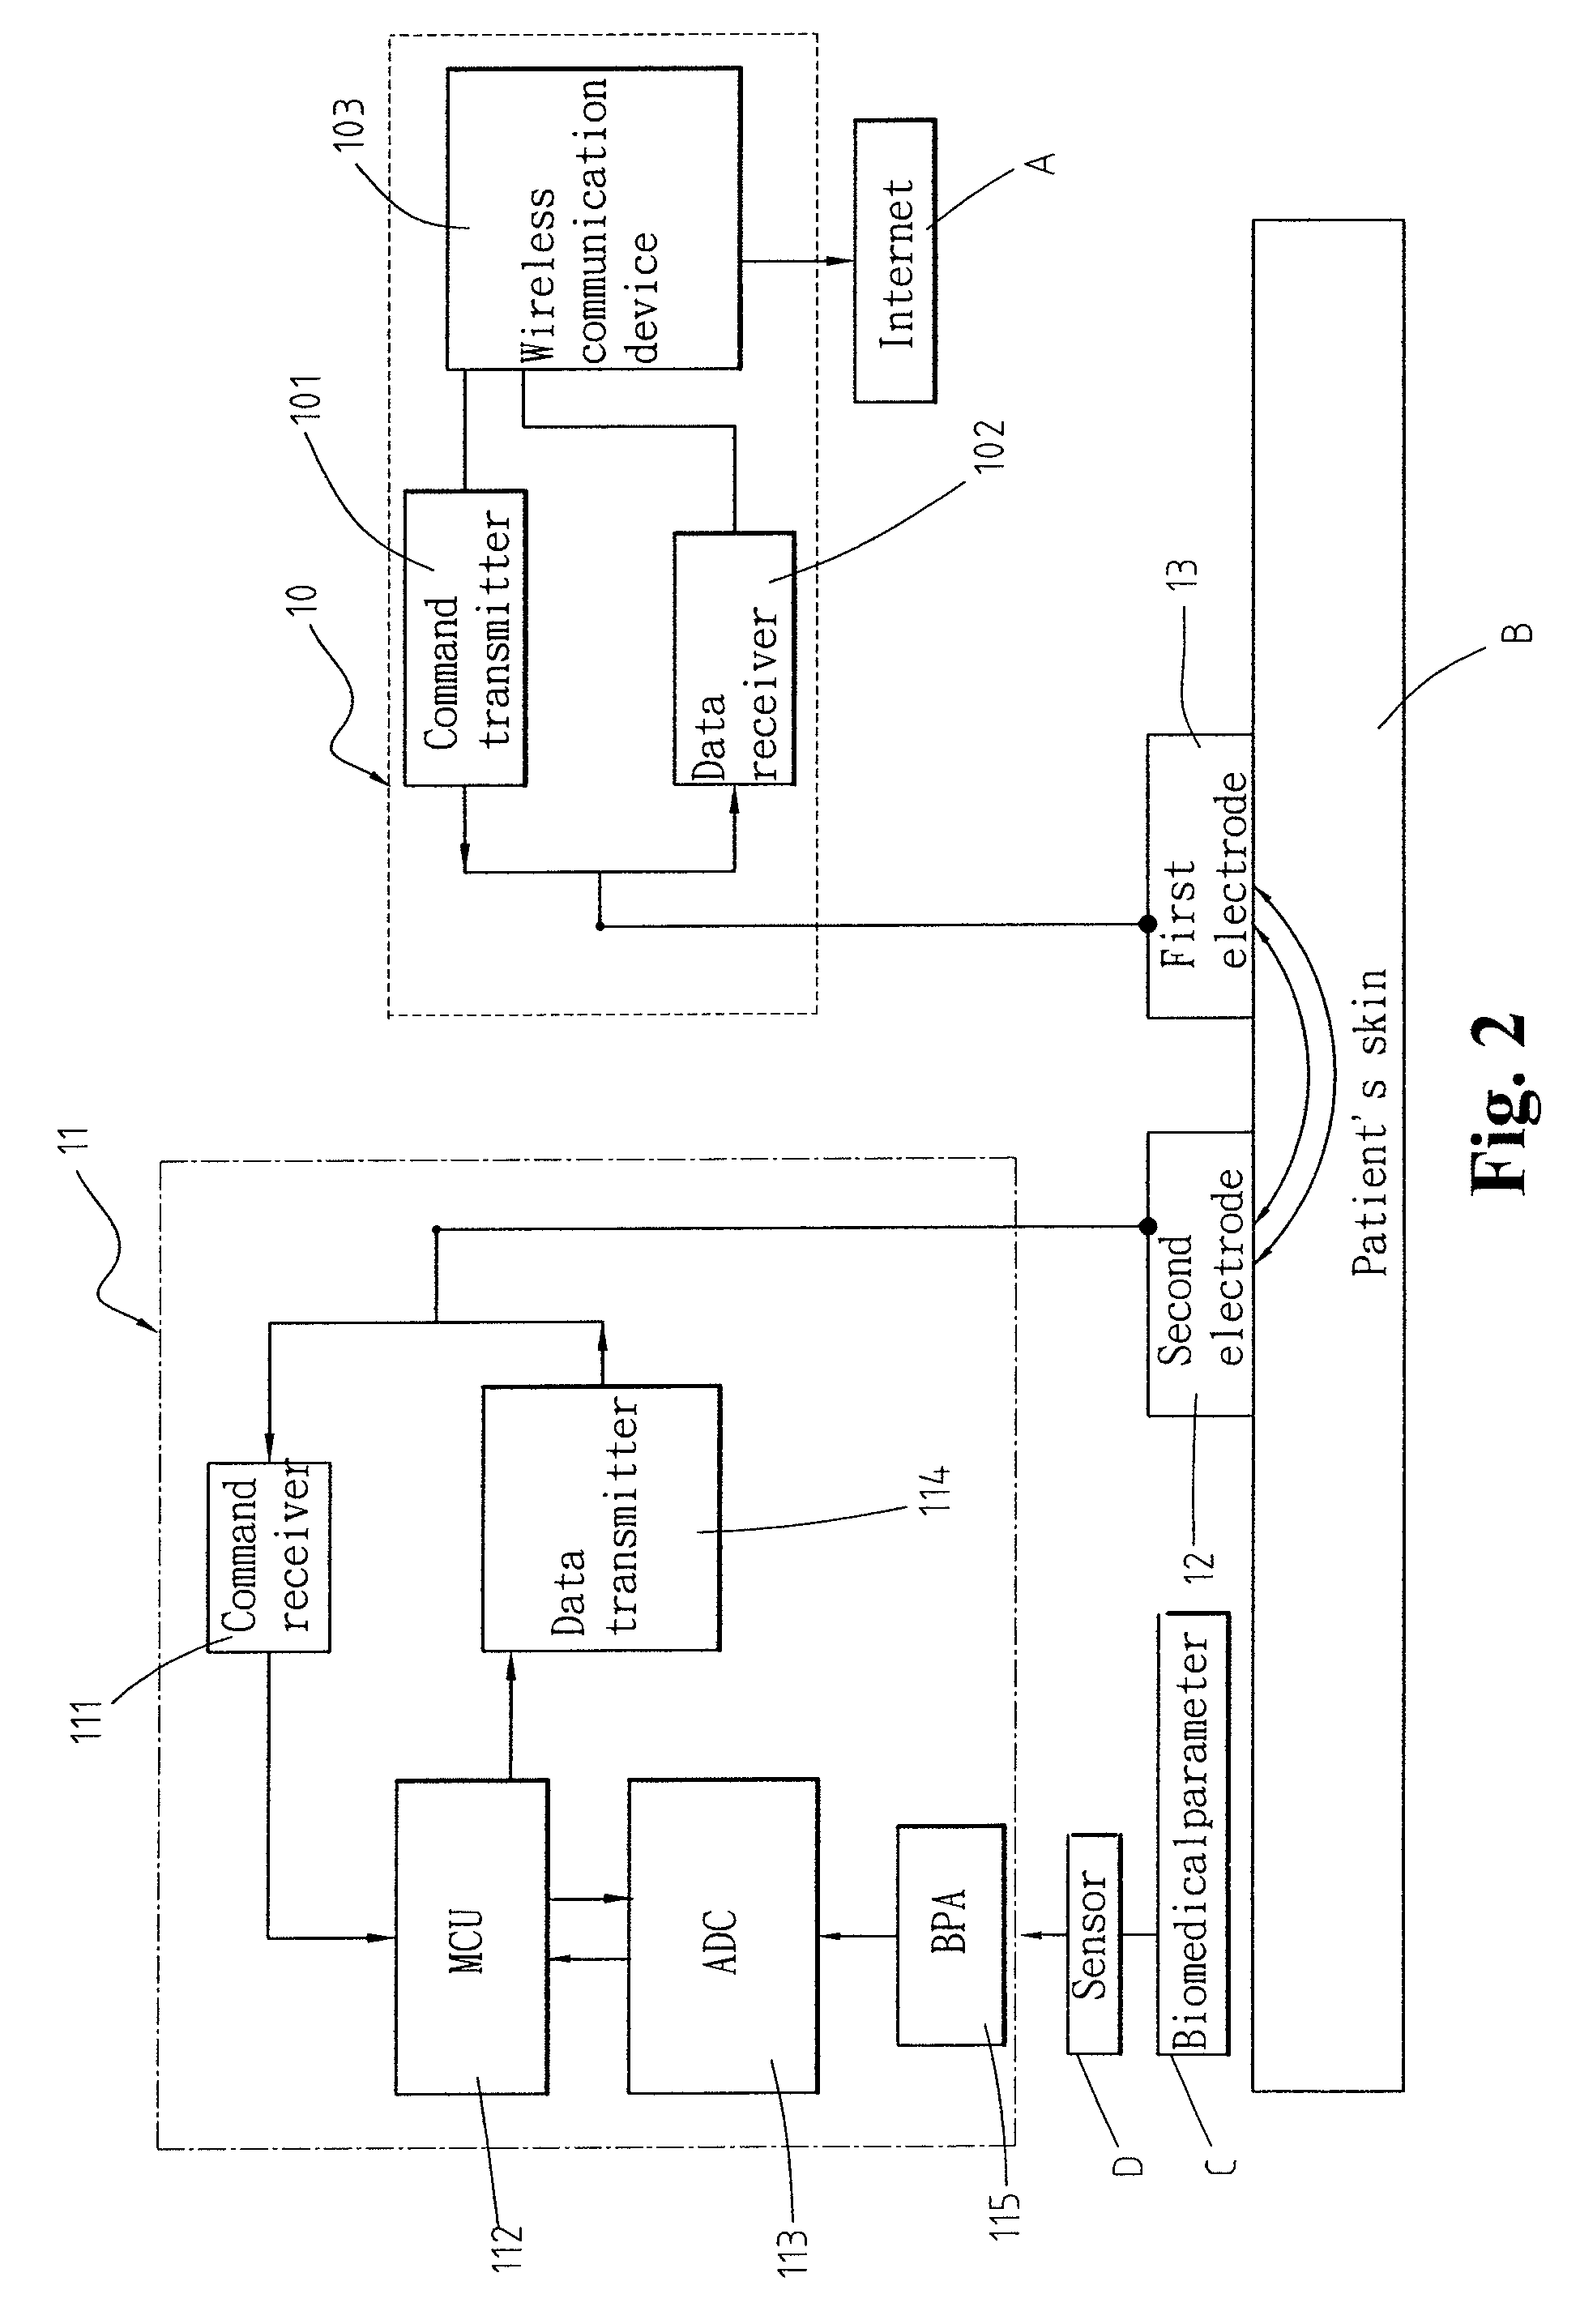 Intra-body communication (IBC) device and a method of implementing the IBC device